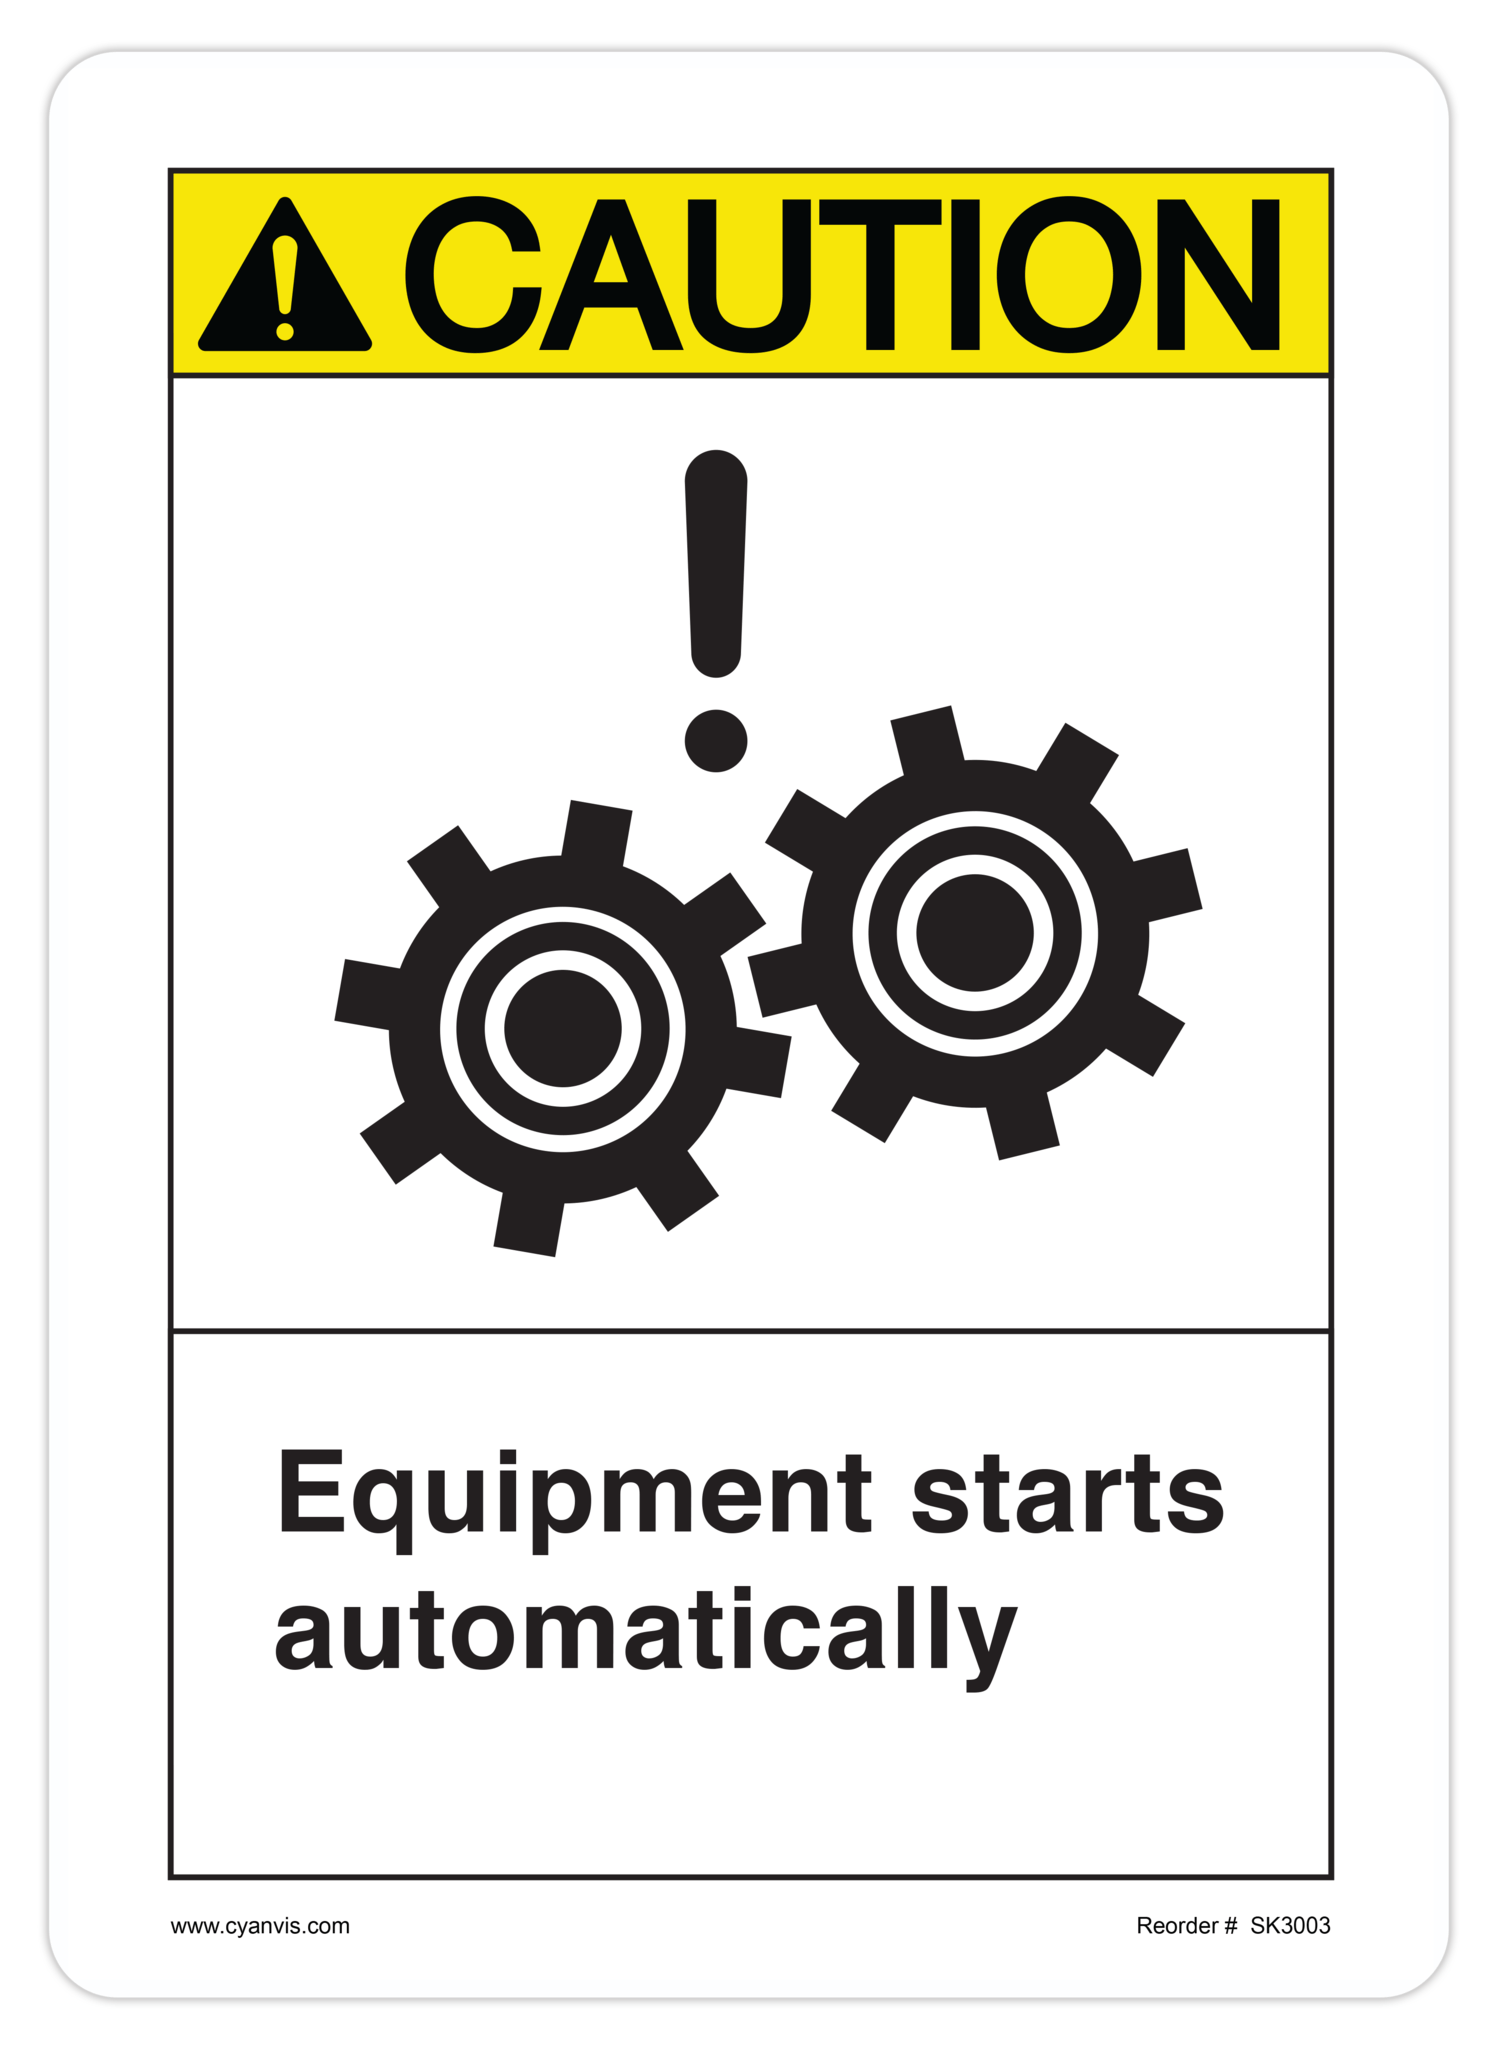 Safety Sign: ASNI - Caution - EQUIPMENT STARTS AUTOMATICALLY - CYANvisuals